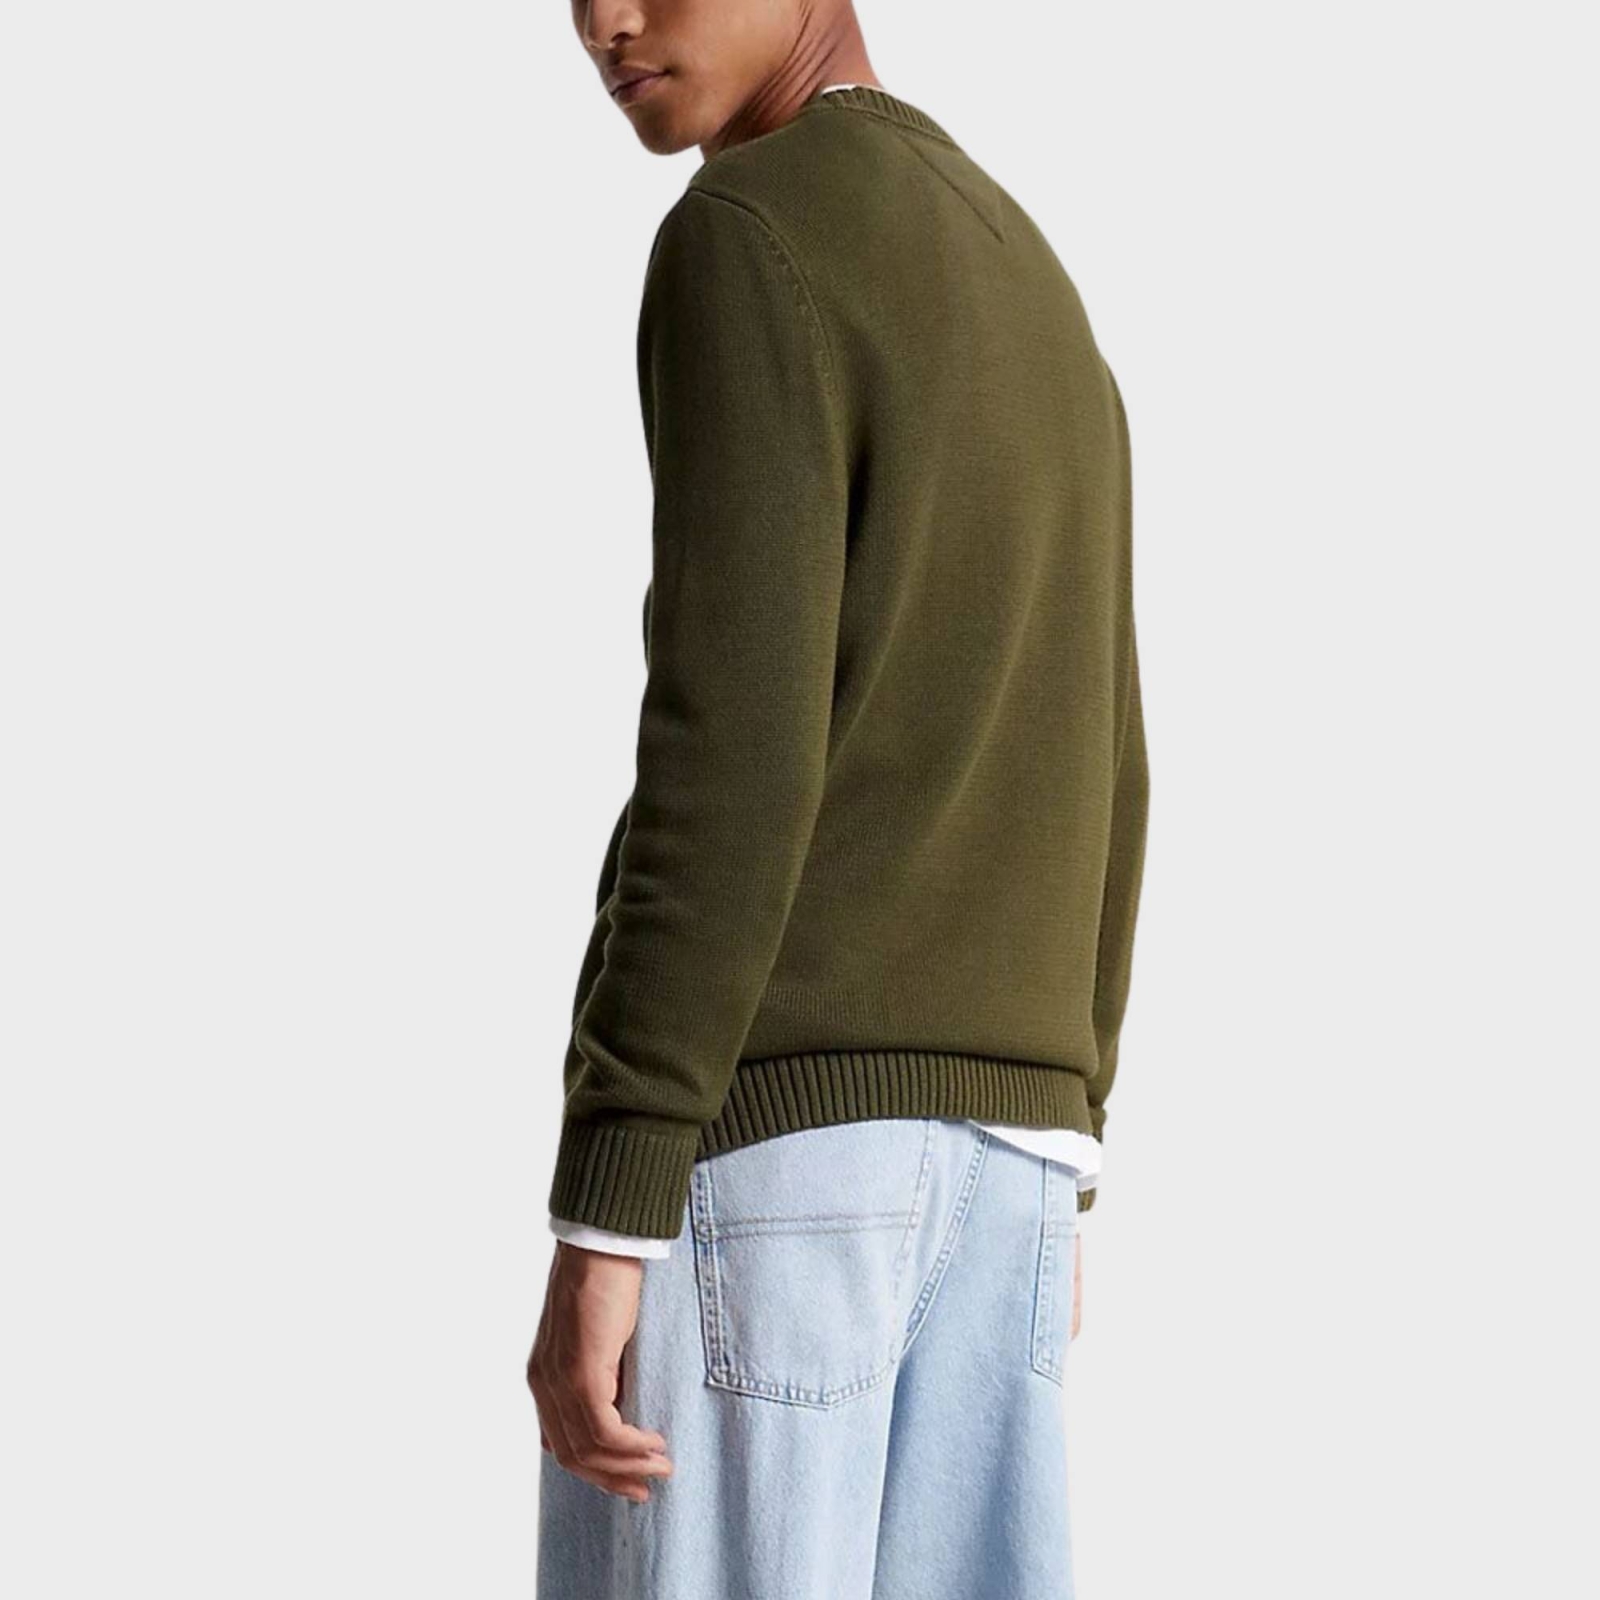 TOMMY JEANS MENS ESSENTIAL CREW NECK SWEATER